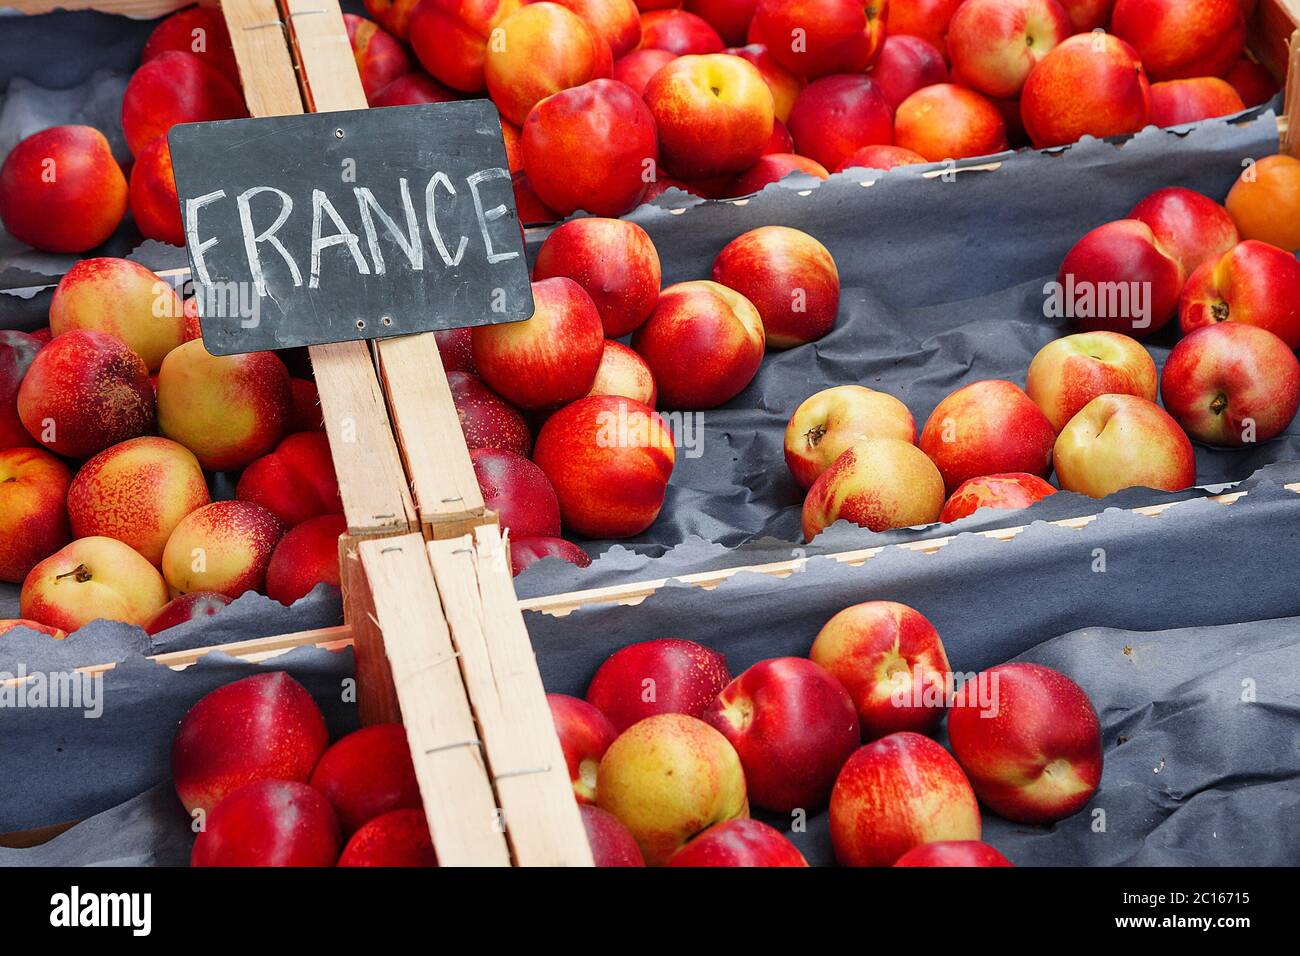 Nectarines form france for sale at a local market Stock Photo